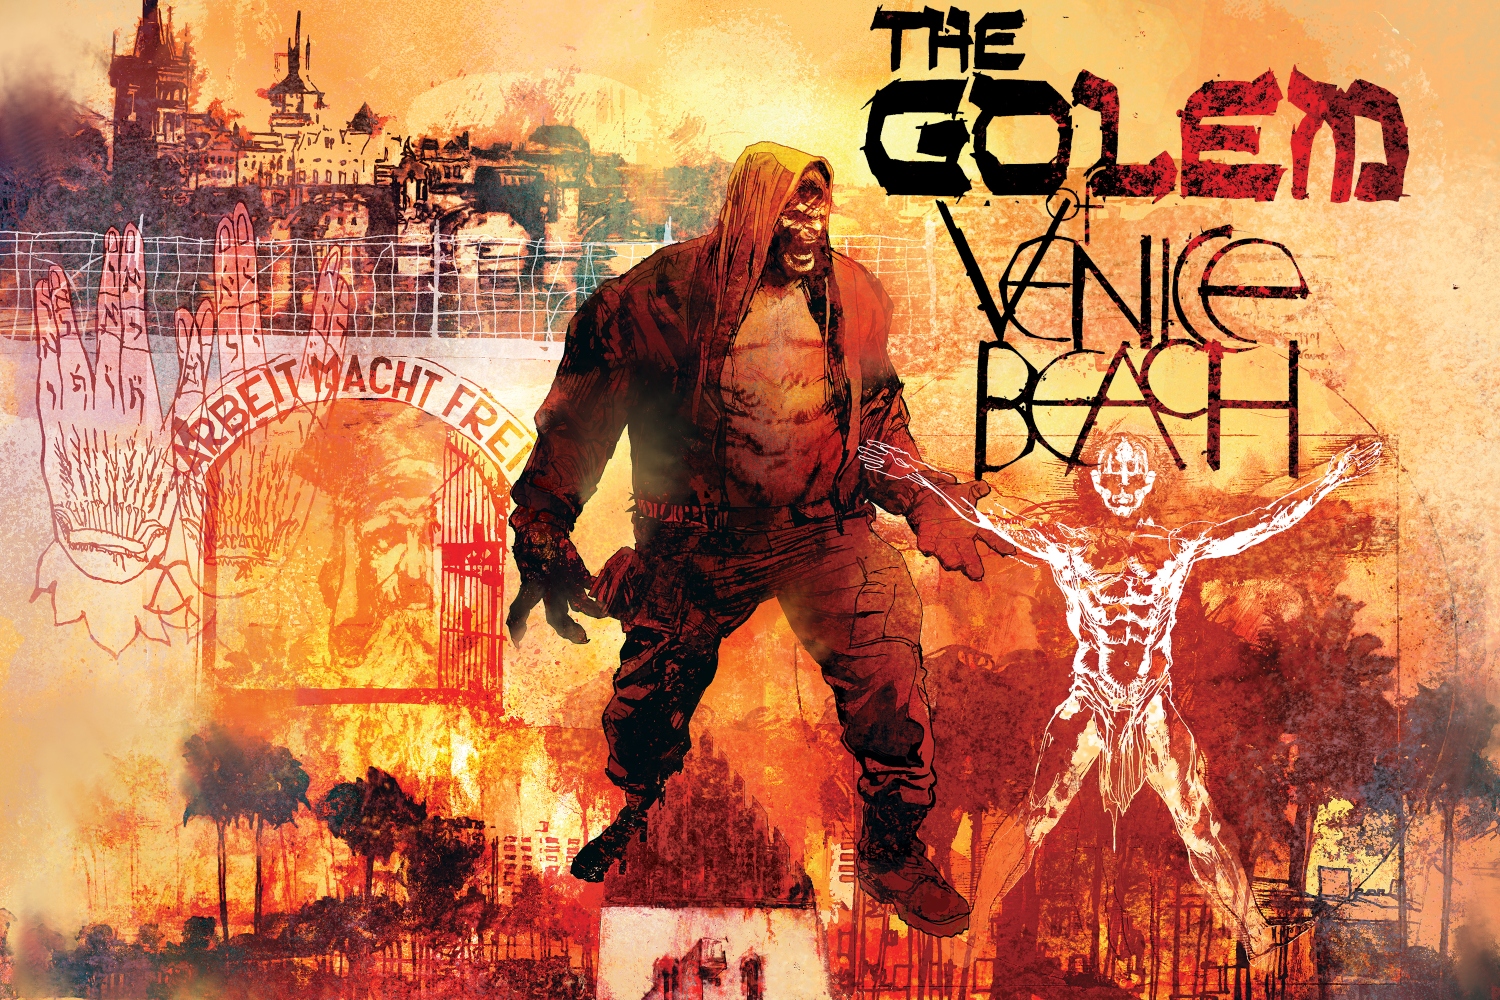 Talking art, history, and collaboration with the creators of 'The Golem of Venice Beach'